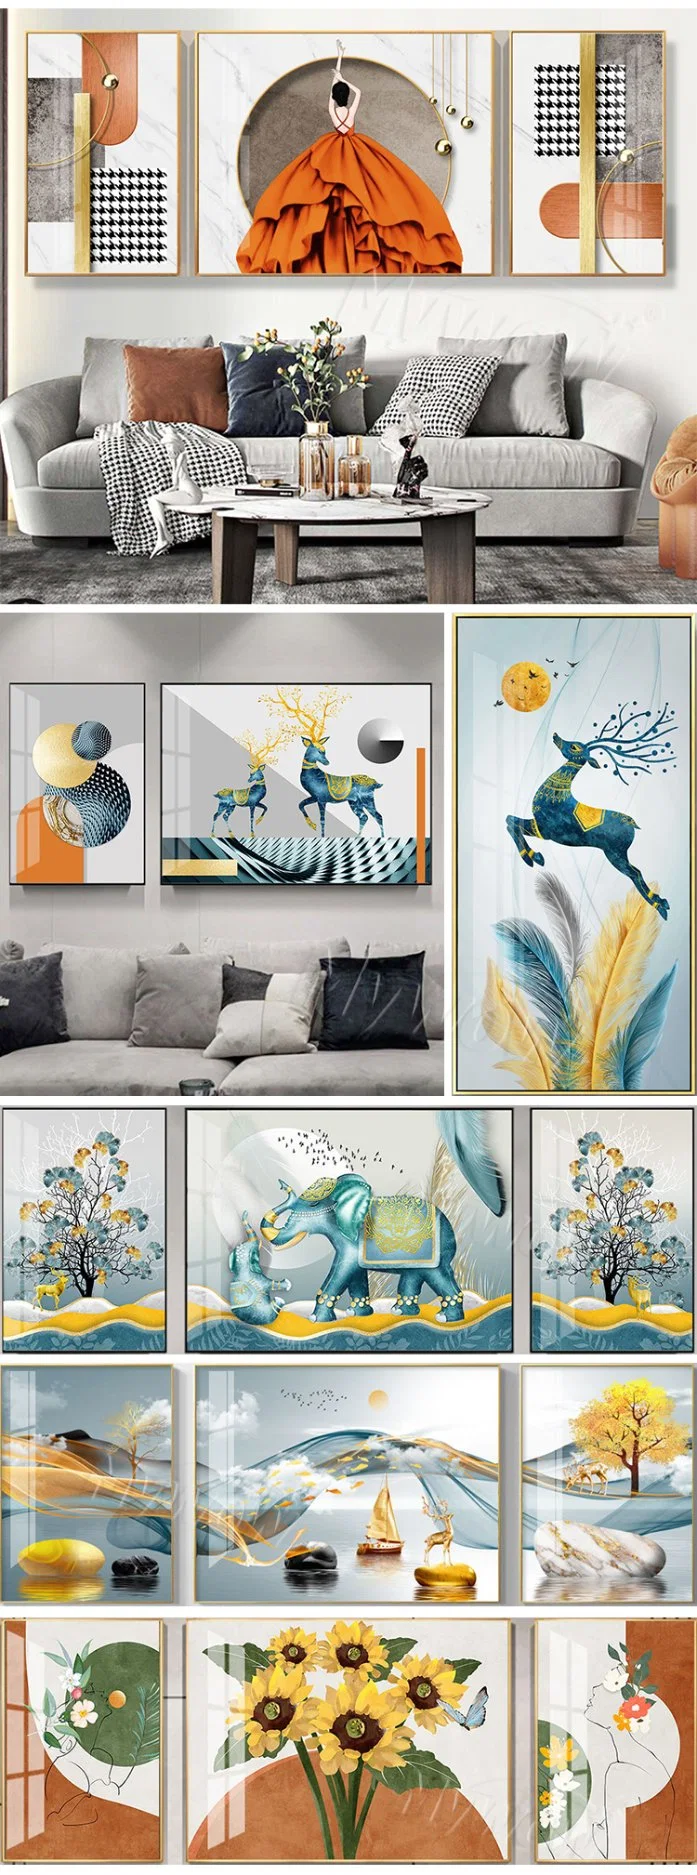 High Quality Fashionable Style Art Work Painting for Interior Decoration